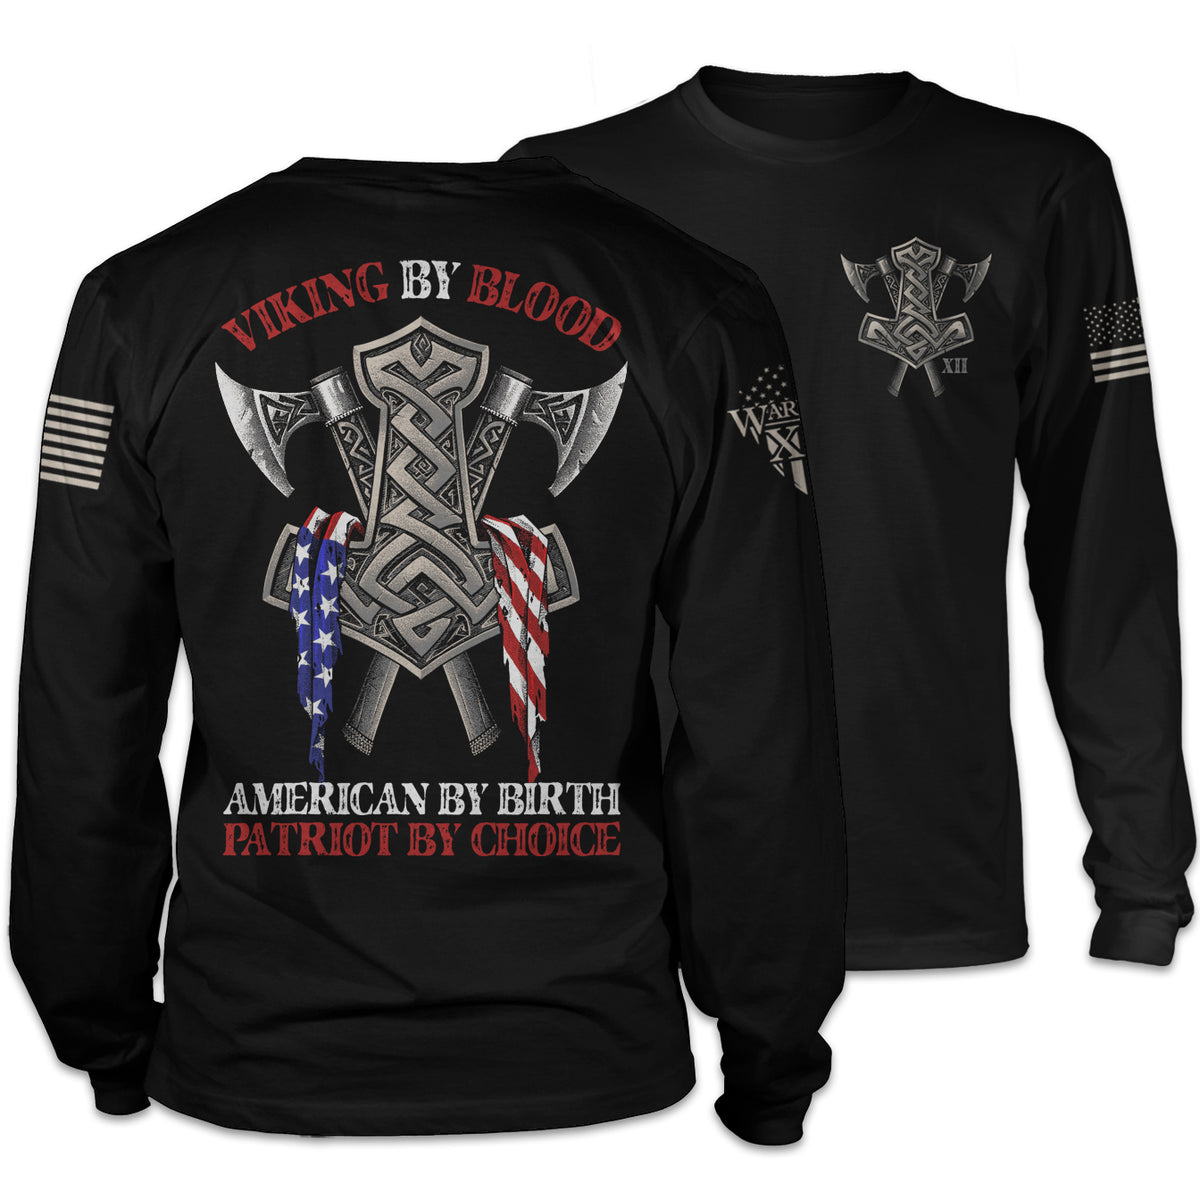 Front & back black long sleeve shirt with the words "Viking by blood, American by birth, patriot by choice" with viking axes printed and an American flag printed on the shirt.